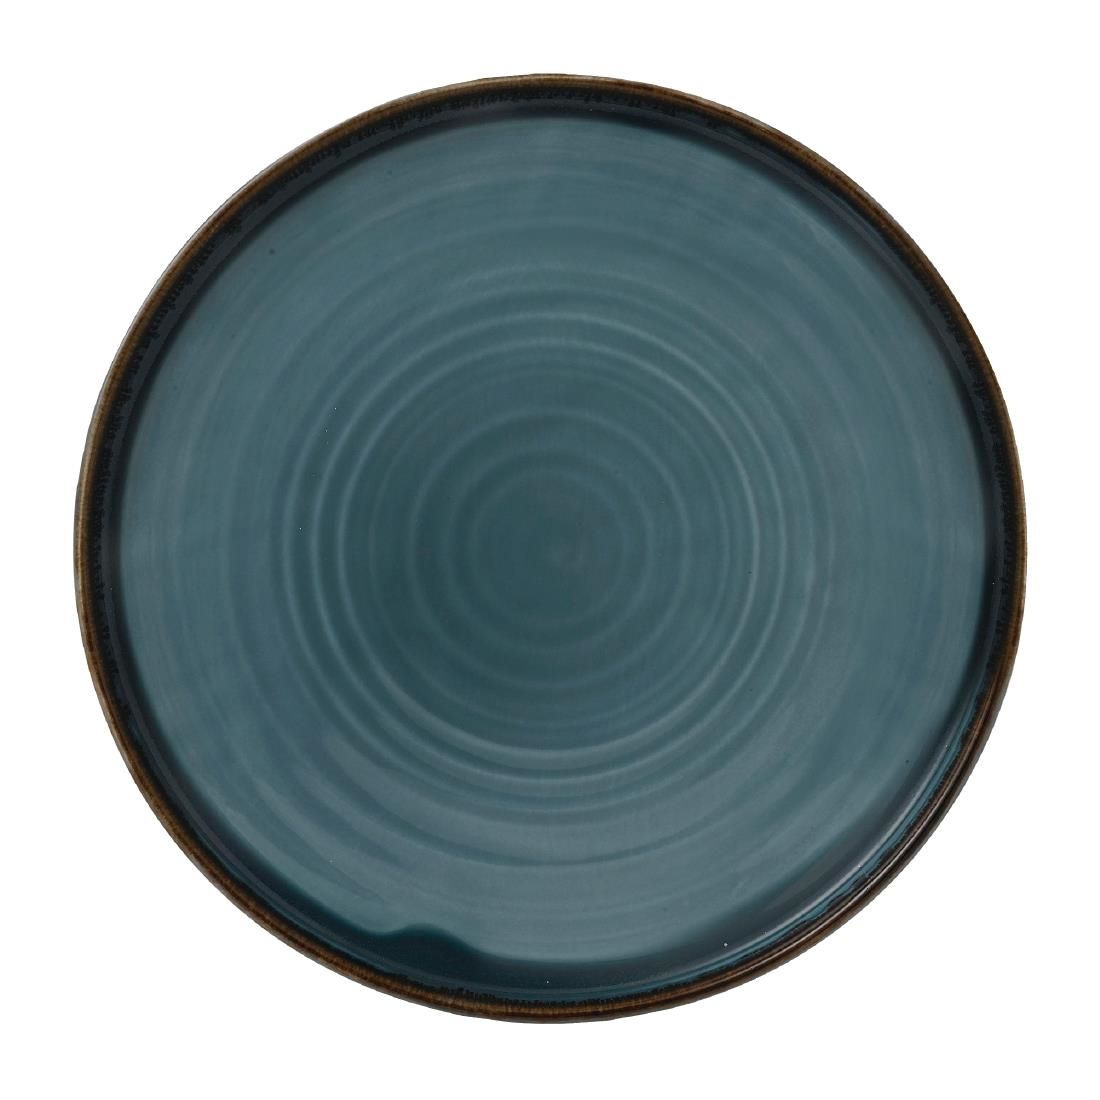 FE398 Dudson Harvest Blue Walled Plate 220mm (Pack of 6) JD Catering Equipment Solutions Ltd